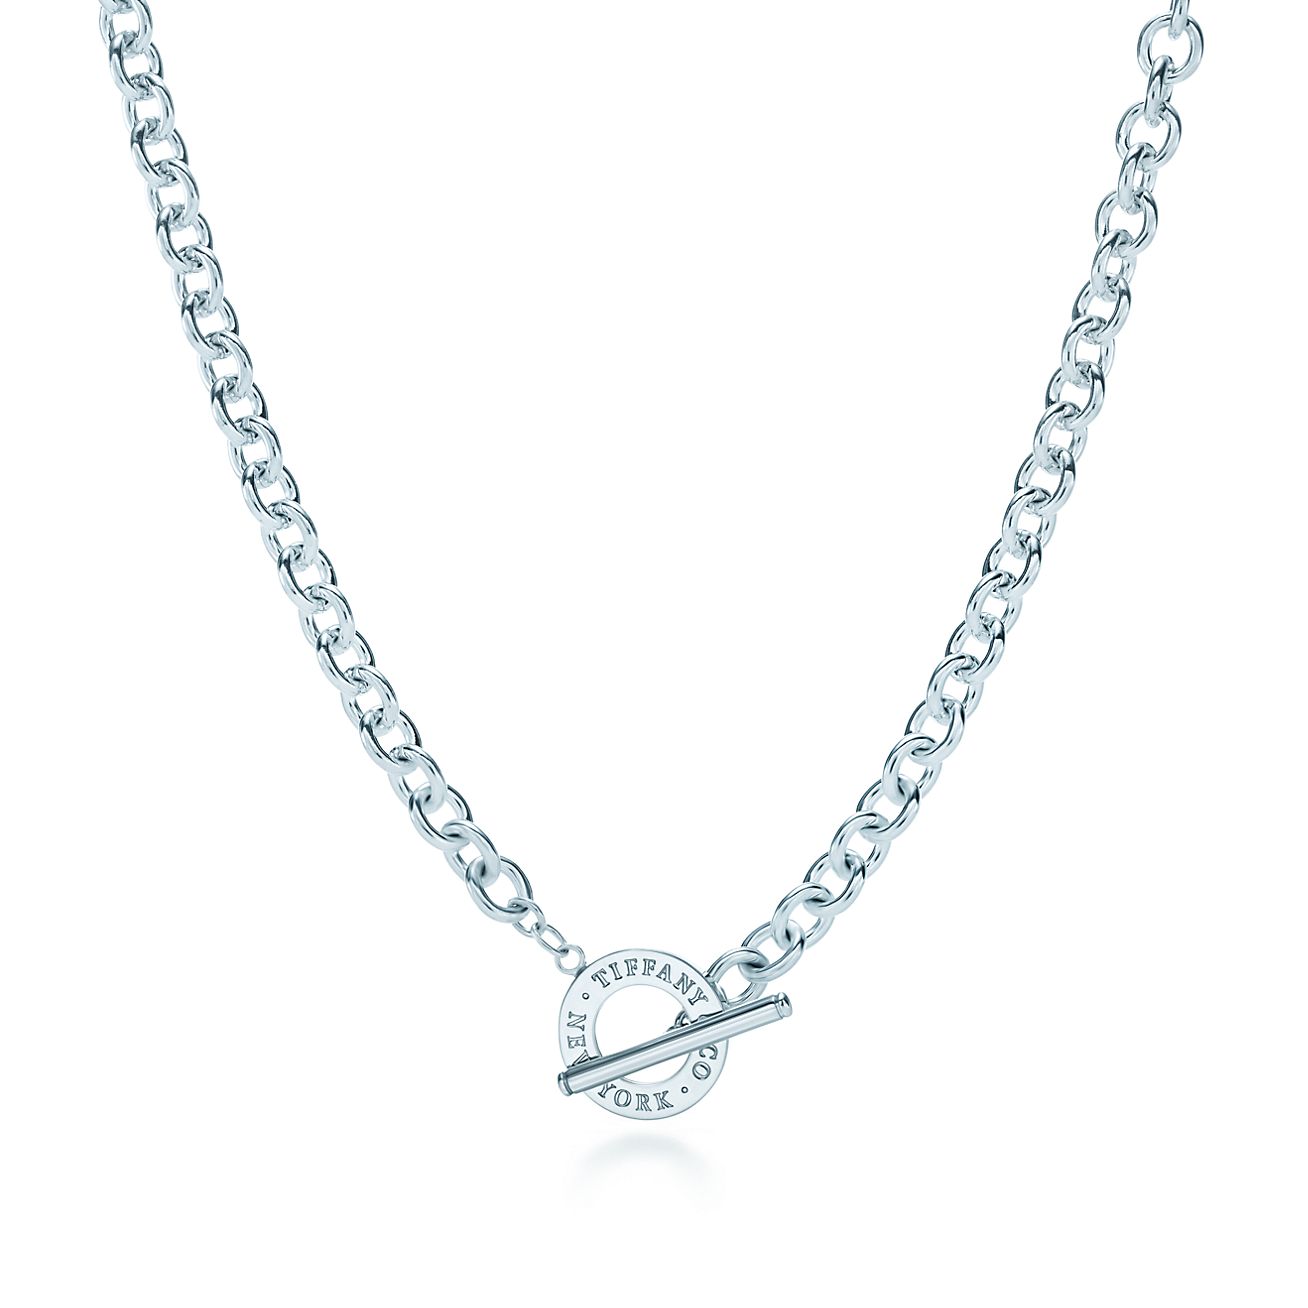 Two-strand rhinestone-pendant necklace - Silver-coloured - Ladies | H&M IN